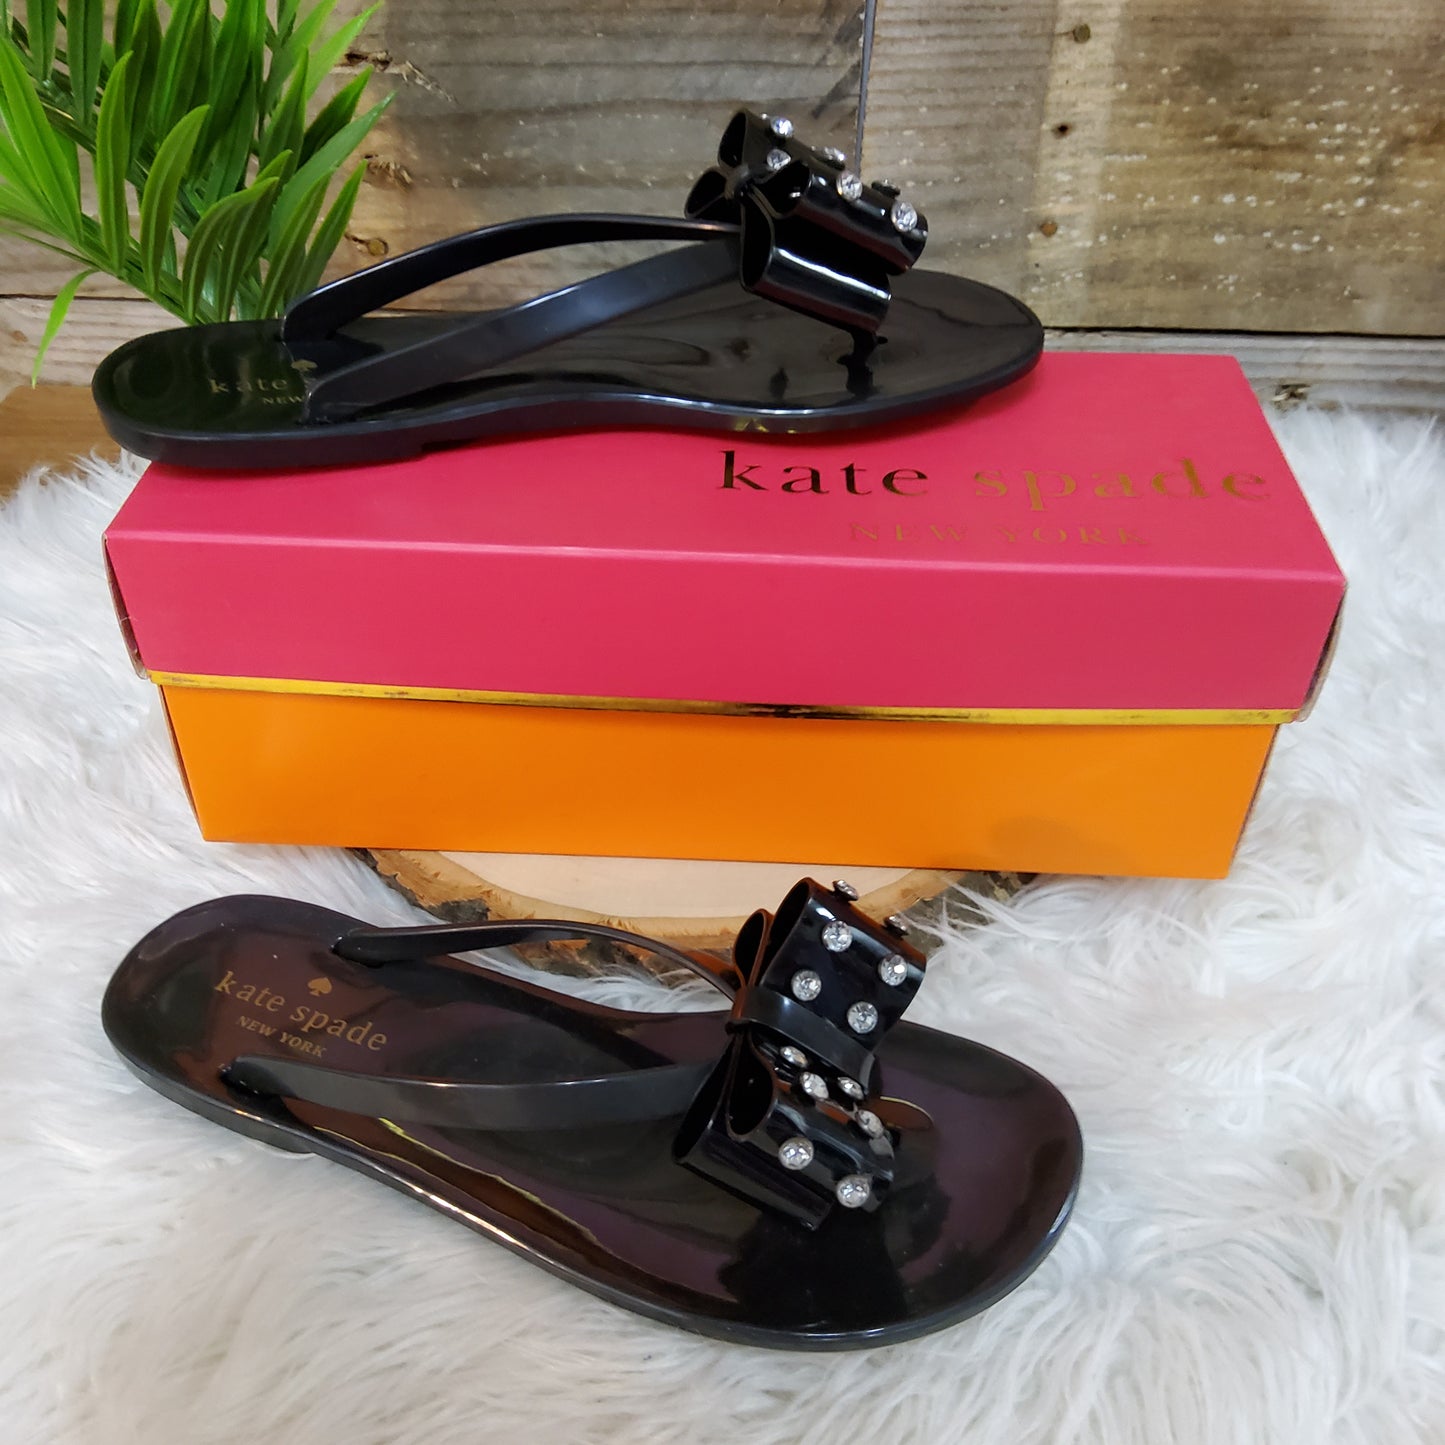 Kate Spade Bow Tie Jelly Sandals Sz 8